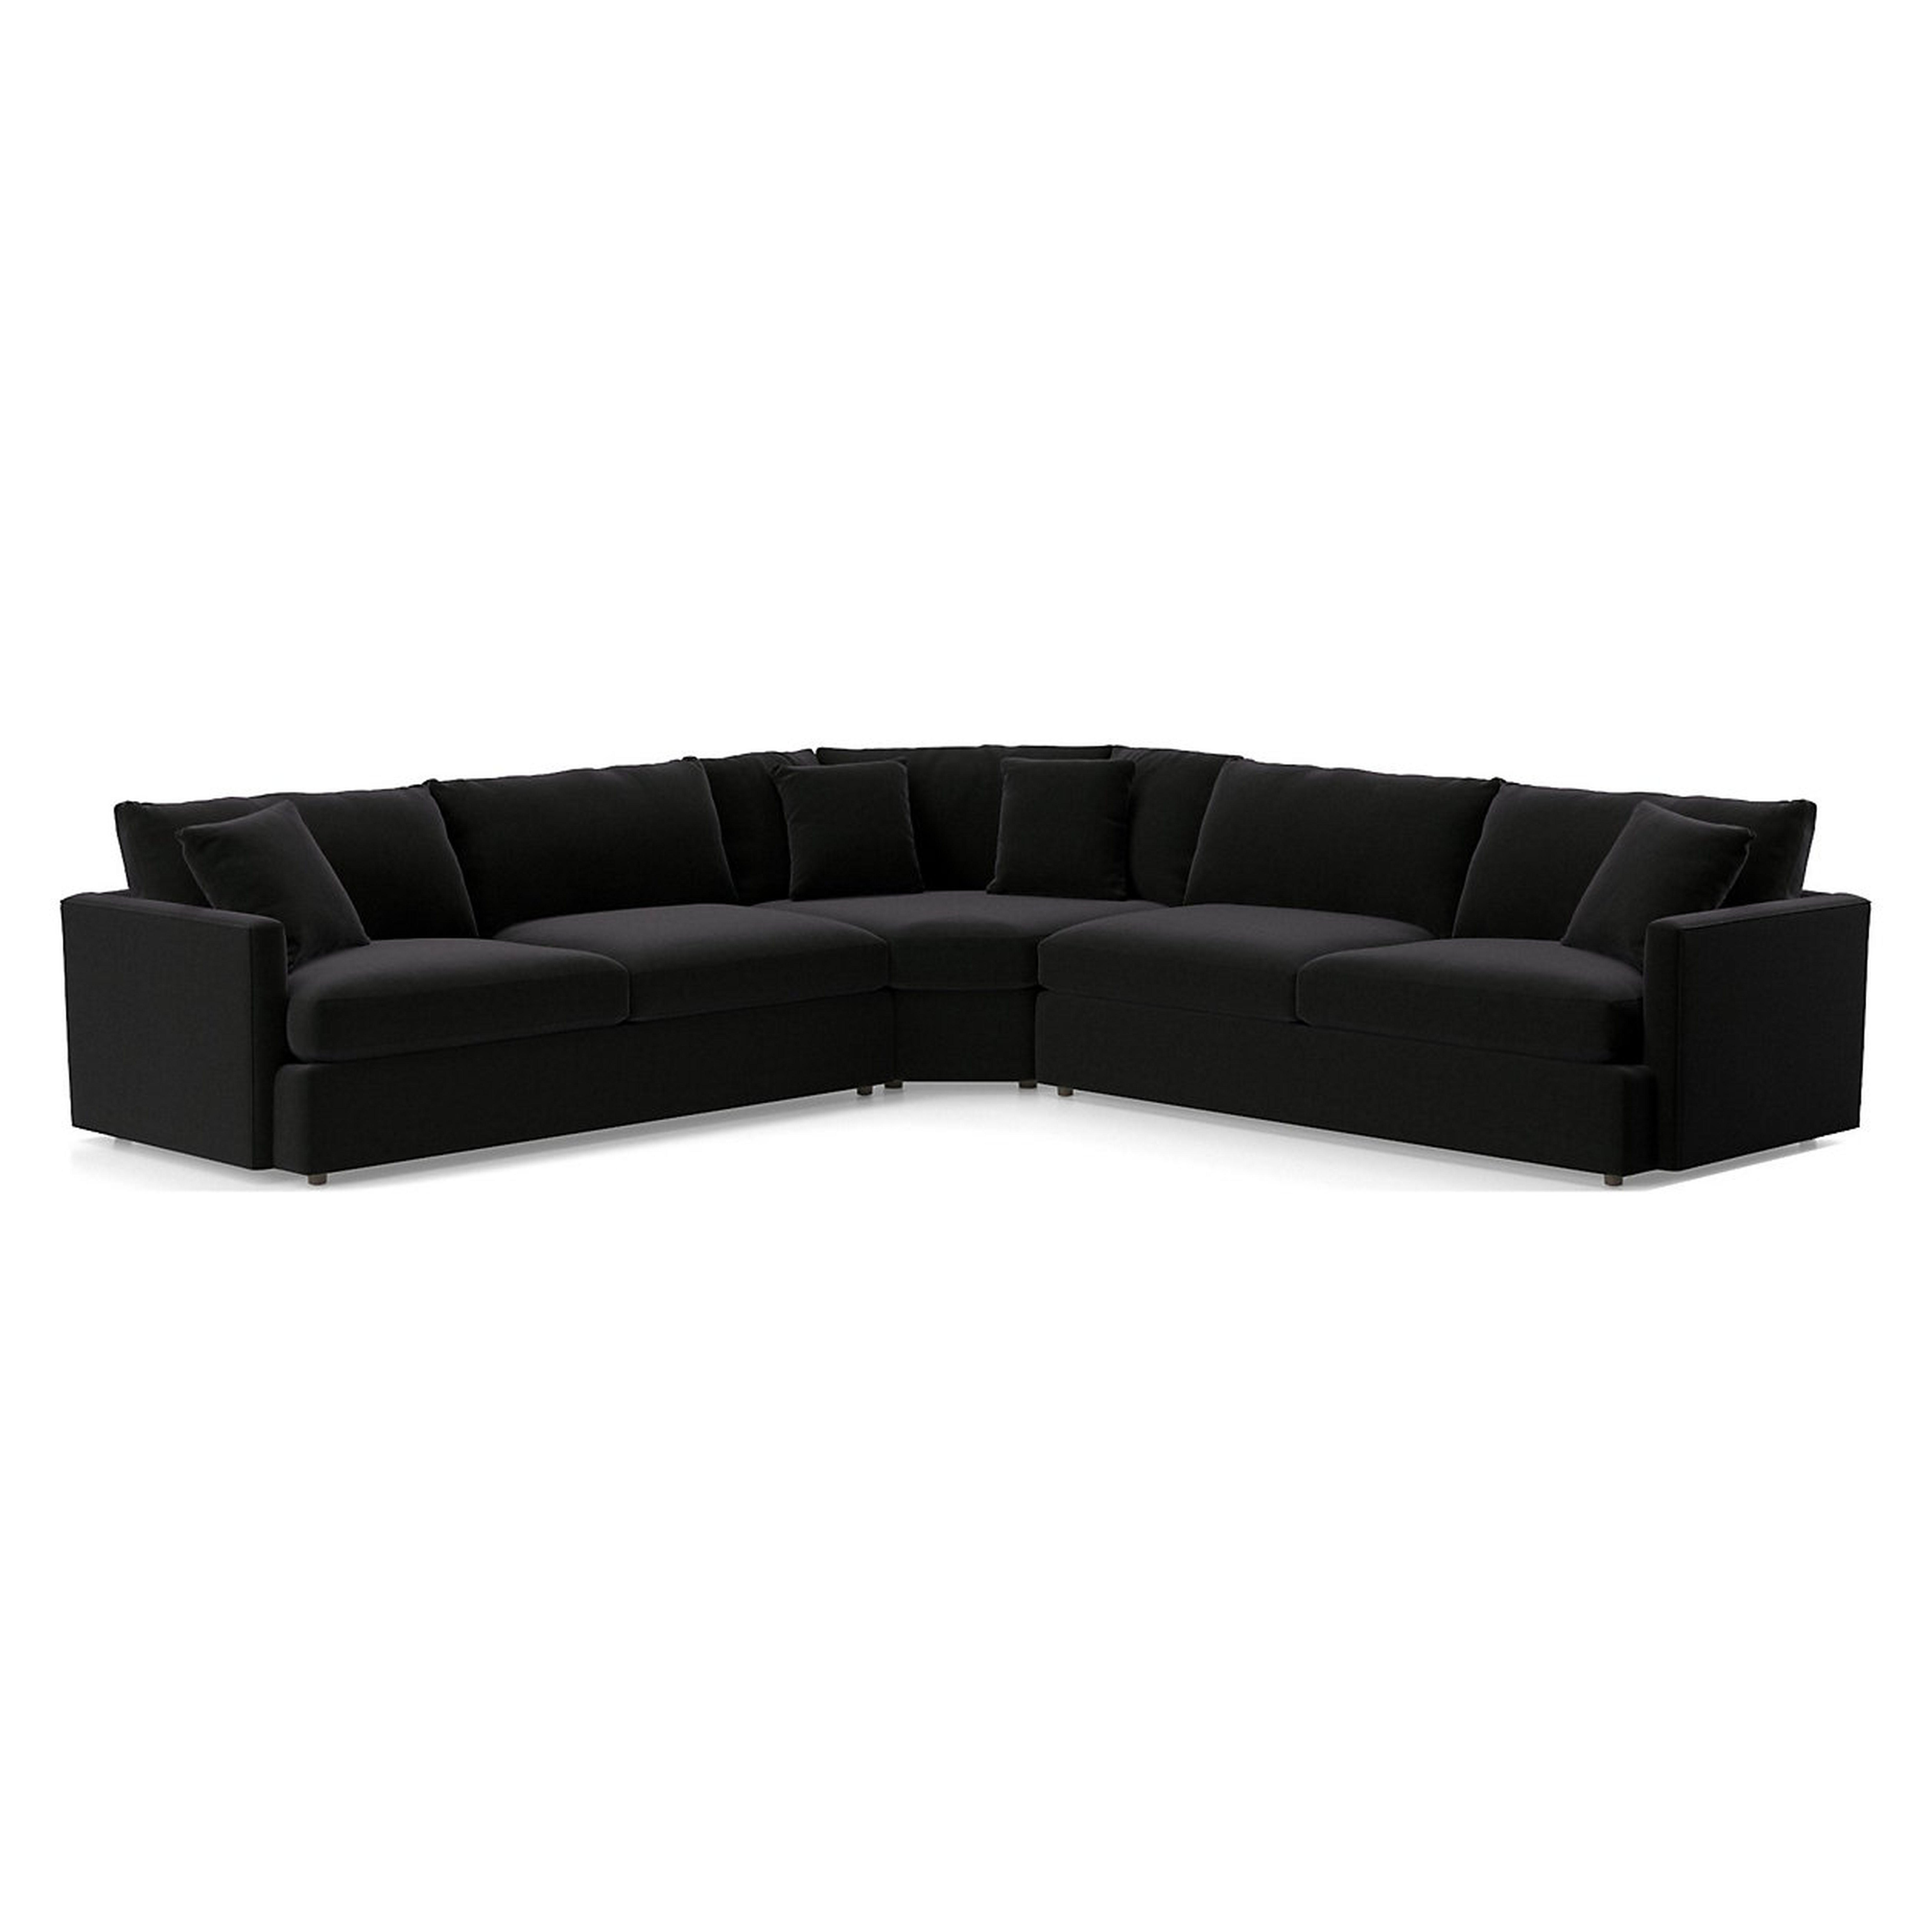 Lounge 3-Piece L-Shaped Sectional Sofa - Crate and Barrel